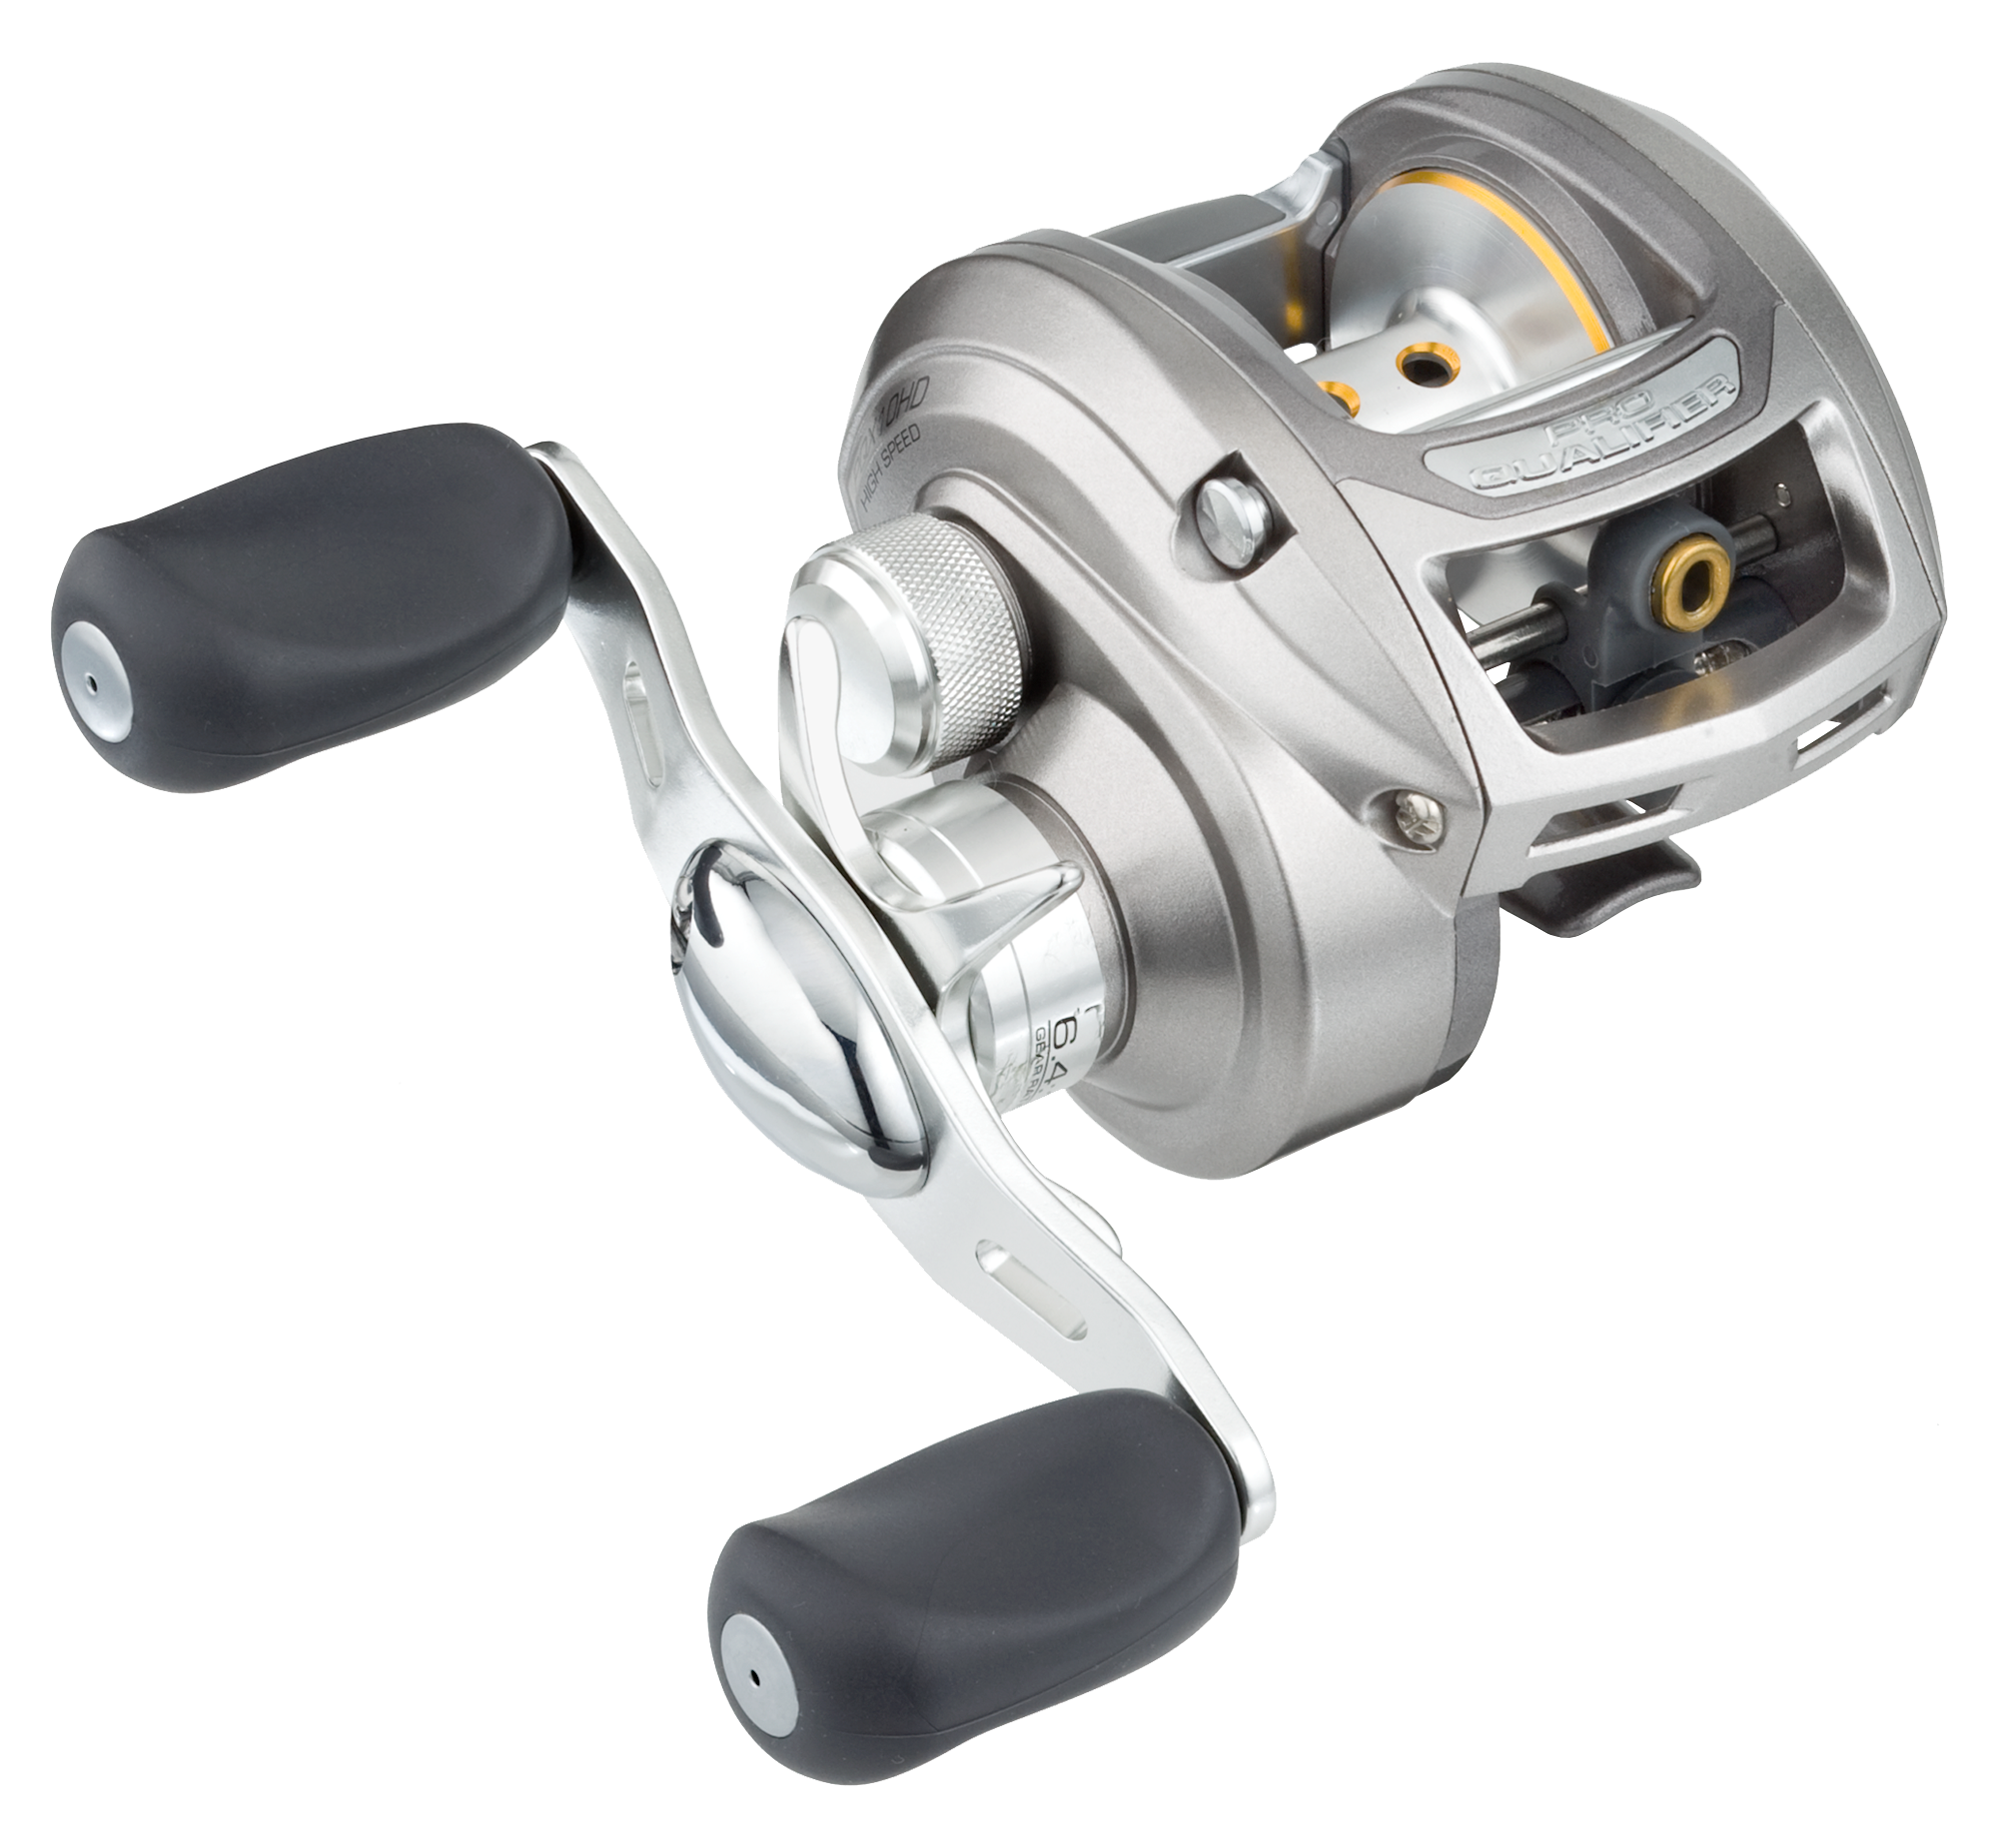 Bass Pro Shops PQD1000 Qualifier Spinning Reel Instructions